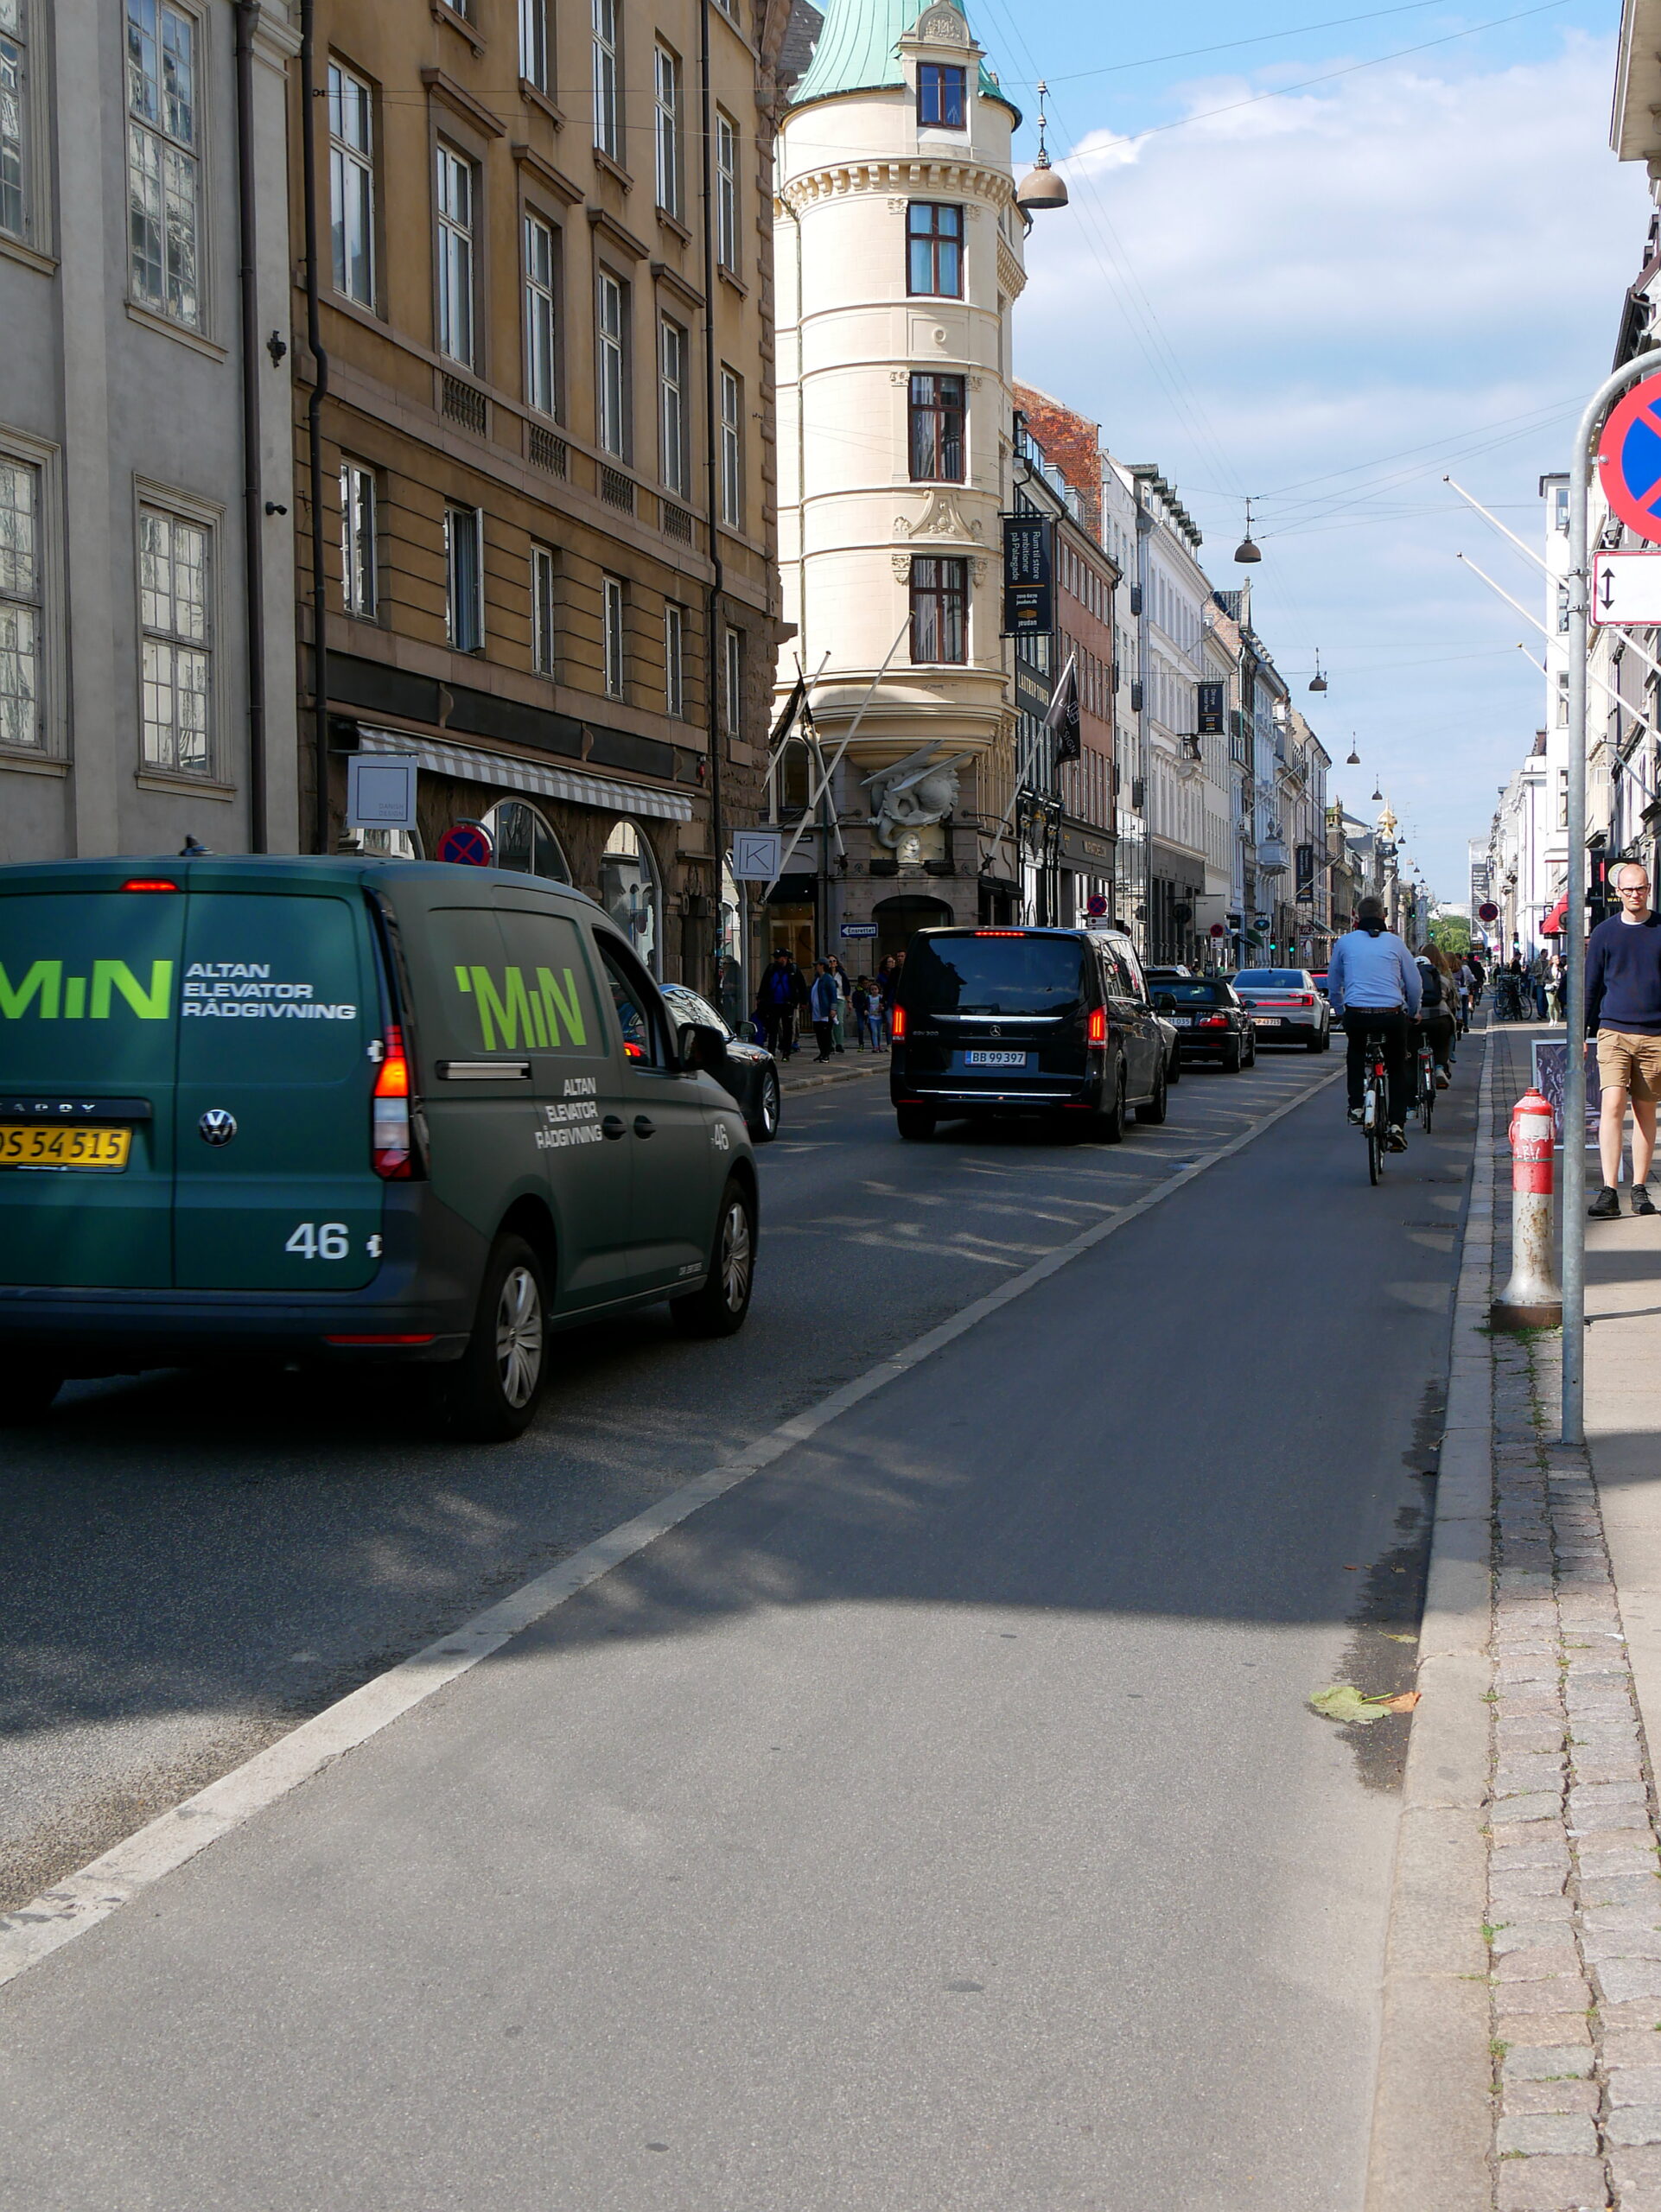 Taxi fares in Copenhagen are high – here’s why